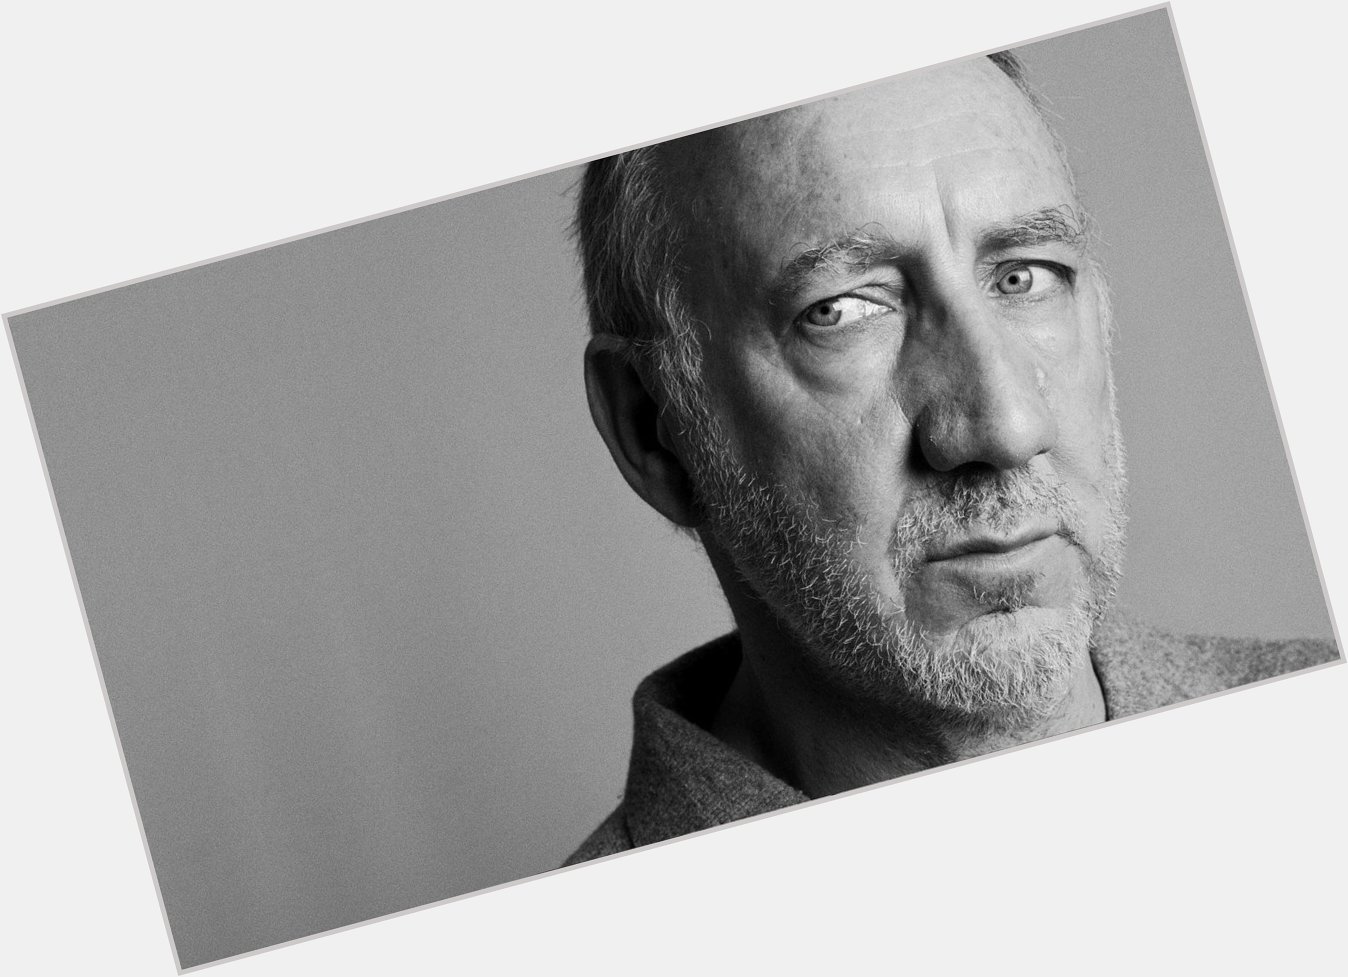  Happy Birthday Pete Townshend! 70 years today  